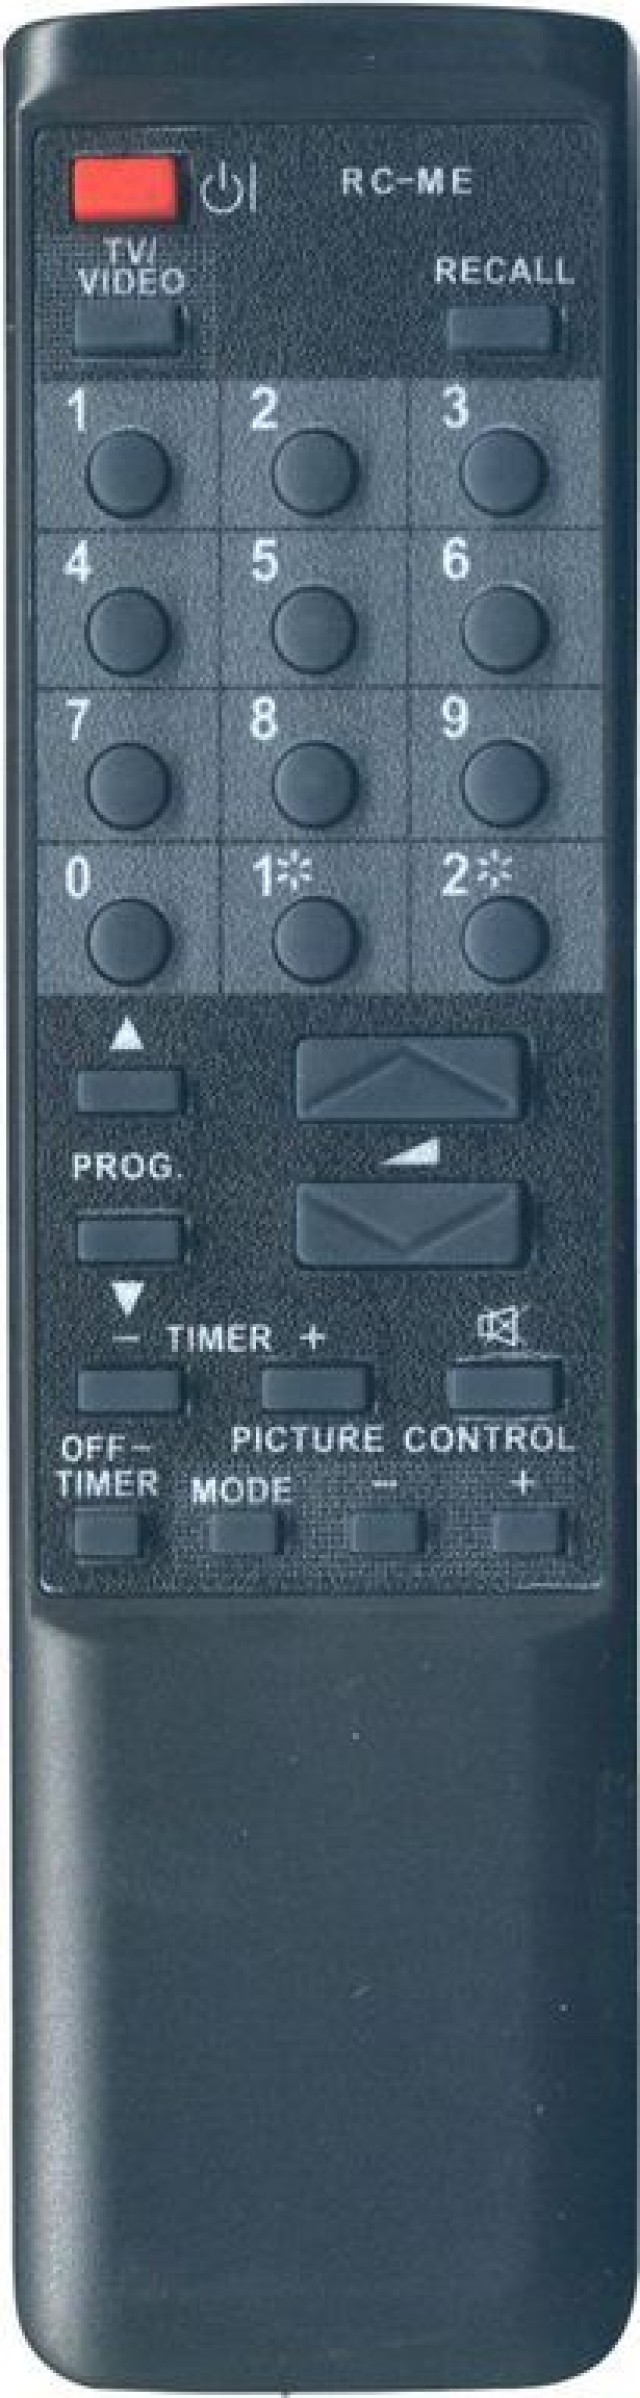 OEM, 0044, Remote control compatible with HITACHI CLE865